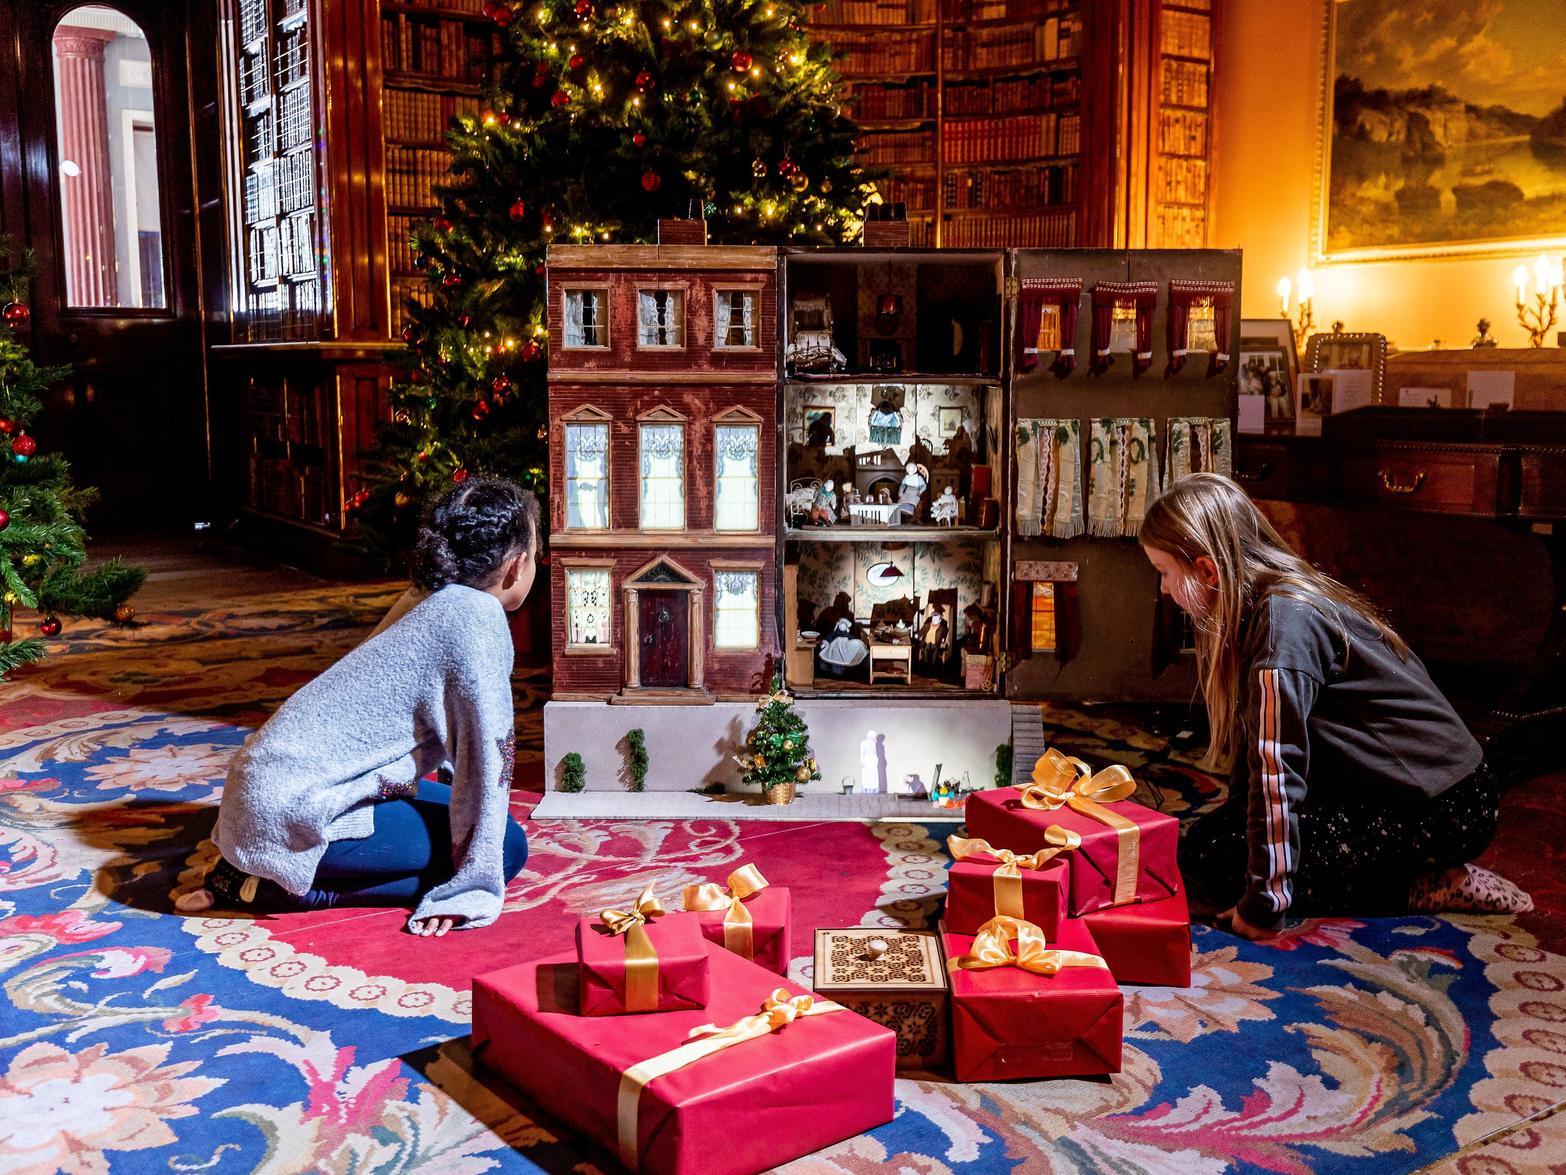 Visitors are welcomed into a world of singing statues and chattering paintings as the House, its objects and stories come 'alive' in an after-hours festive experience. Runs until January 5.